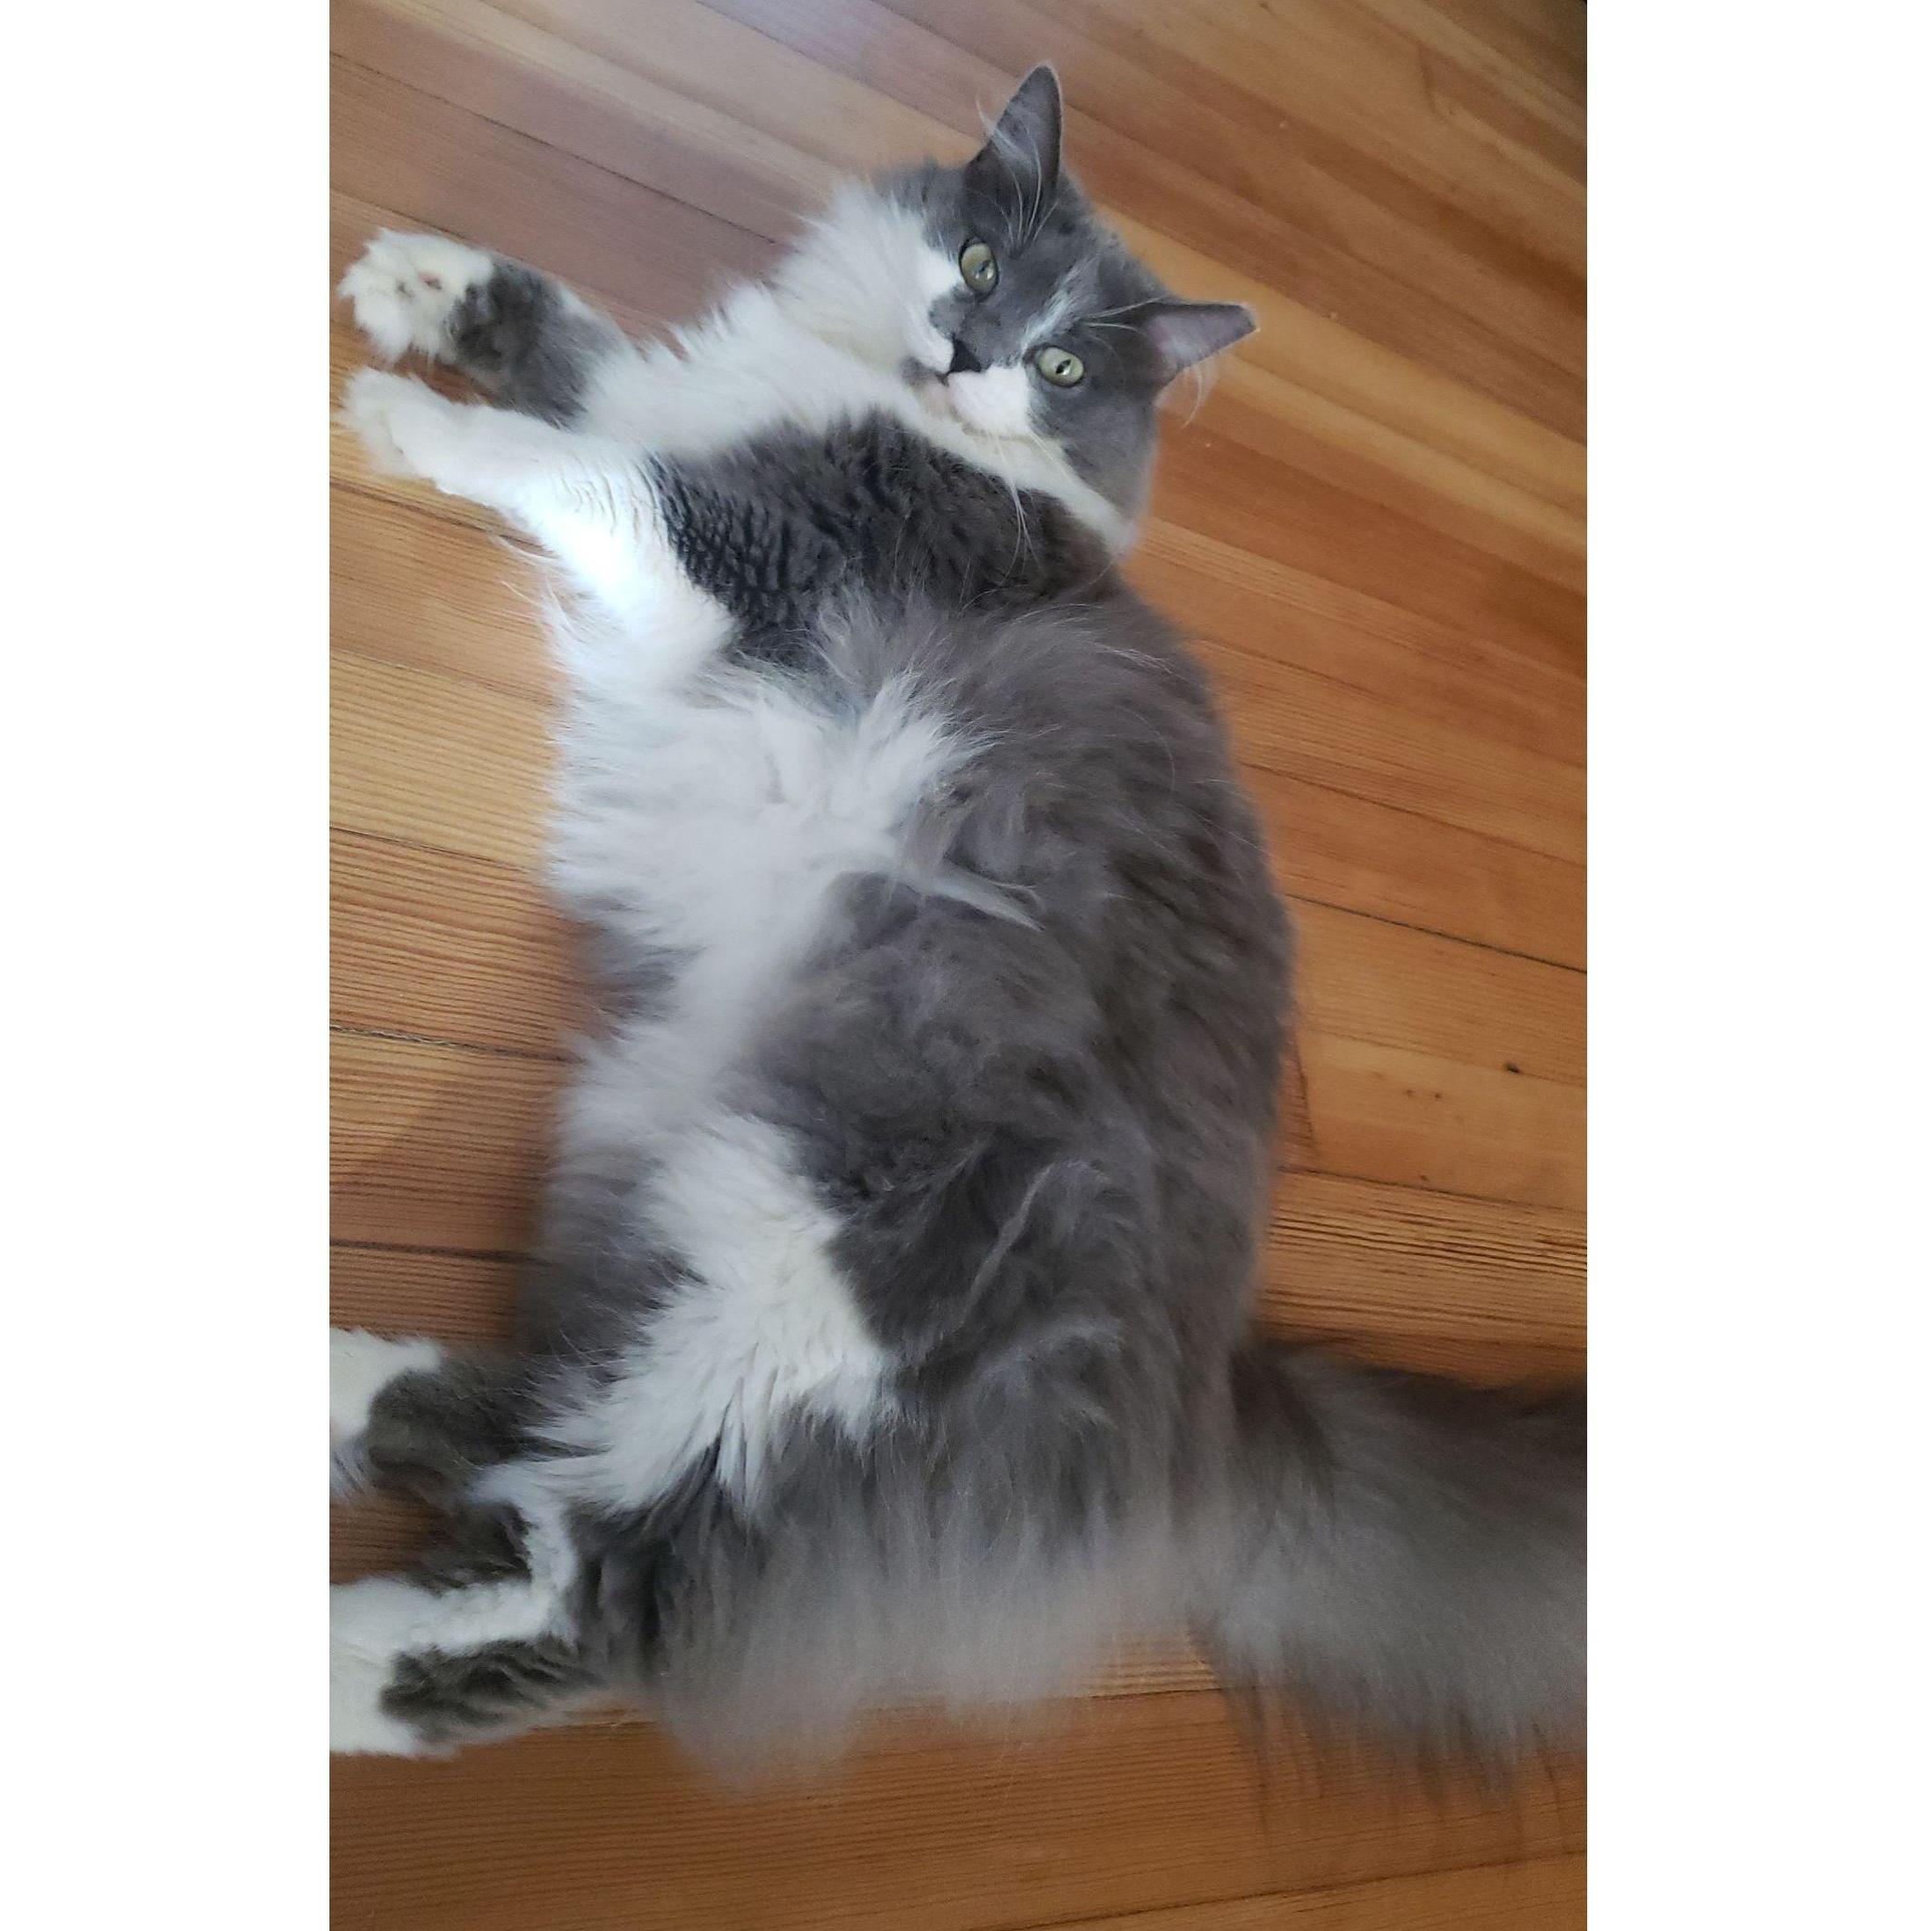 As you can see here, Vera's best feature is clearly her abundance of floof. She loves to get butt scratches & belly rubs under the right conditions.